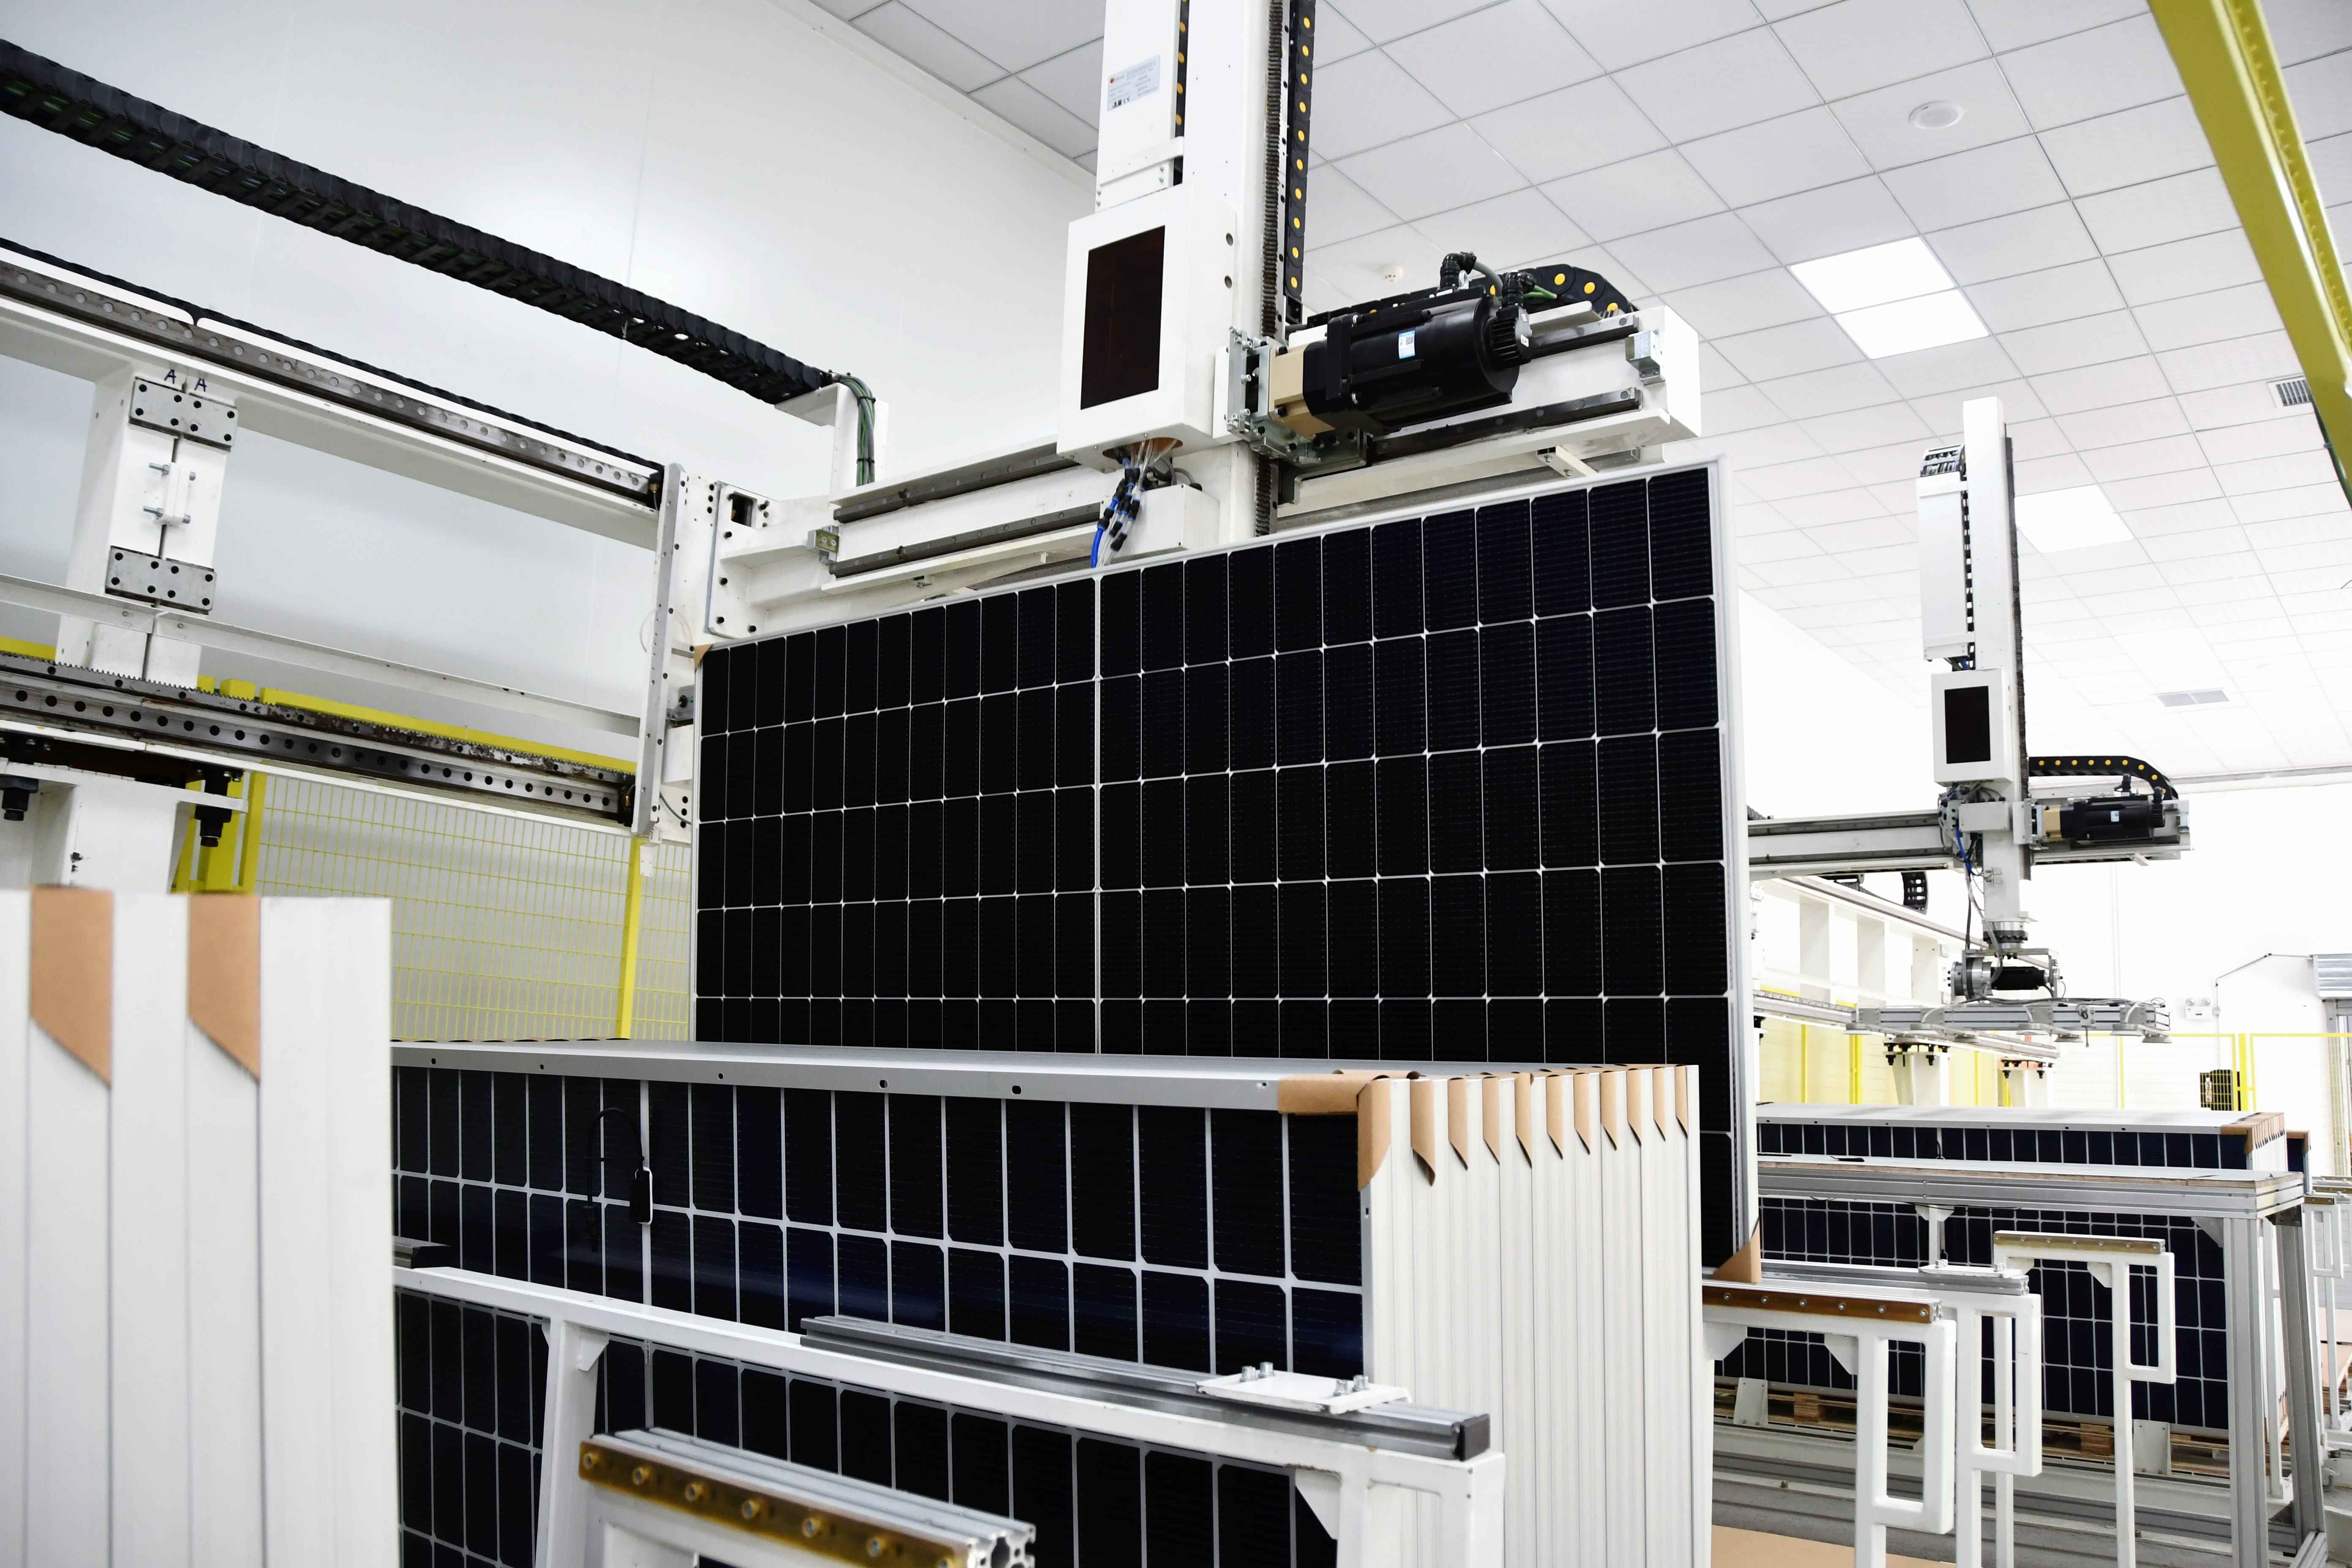 Photovoltaic products in production